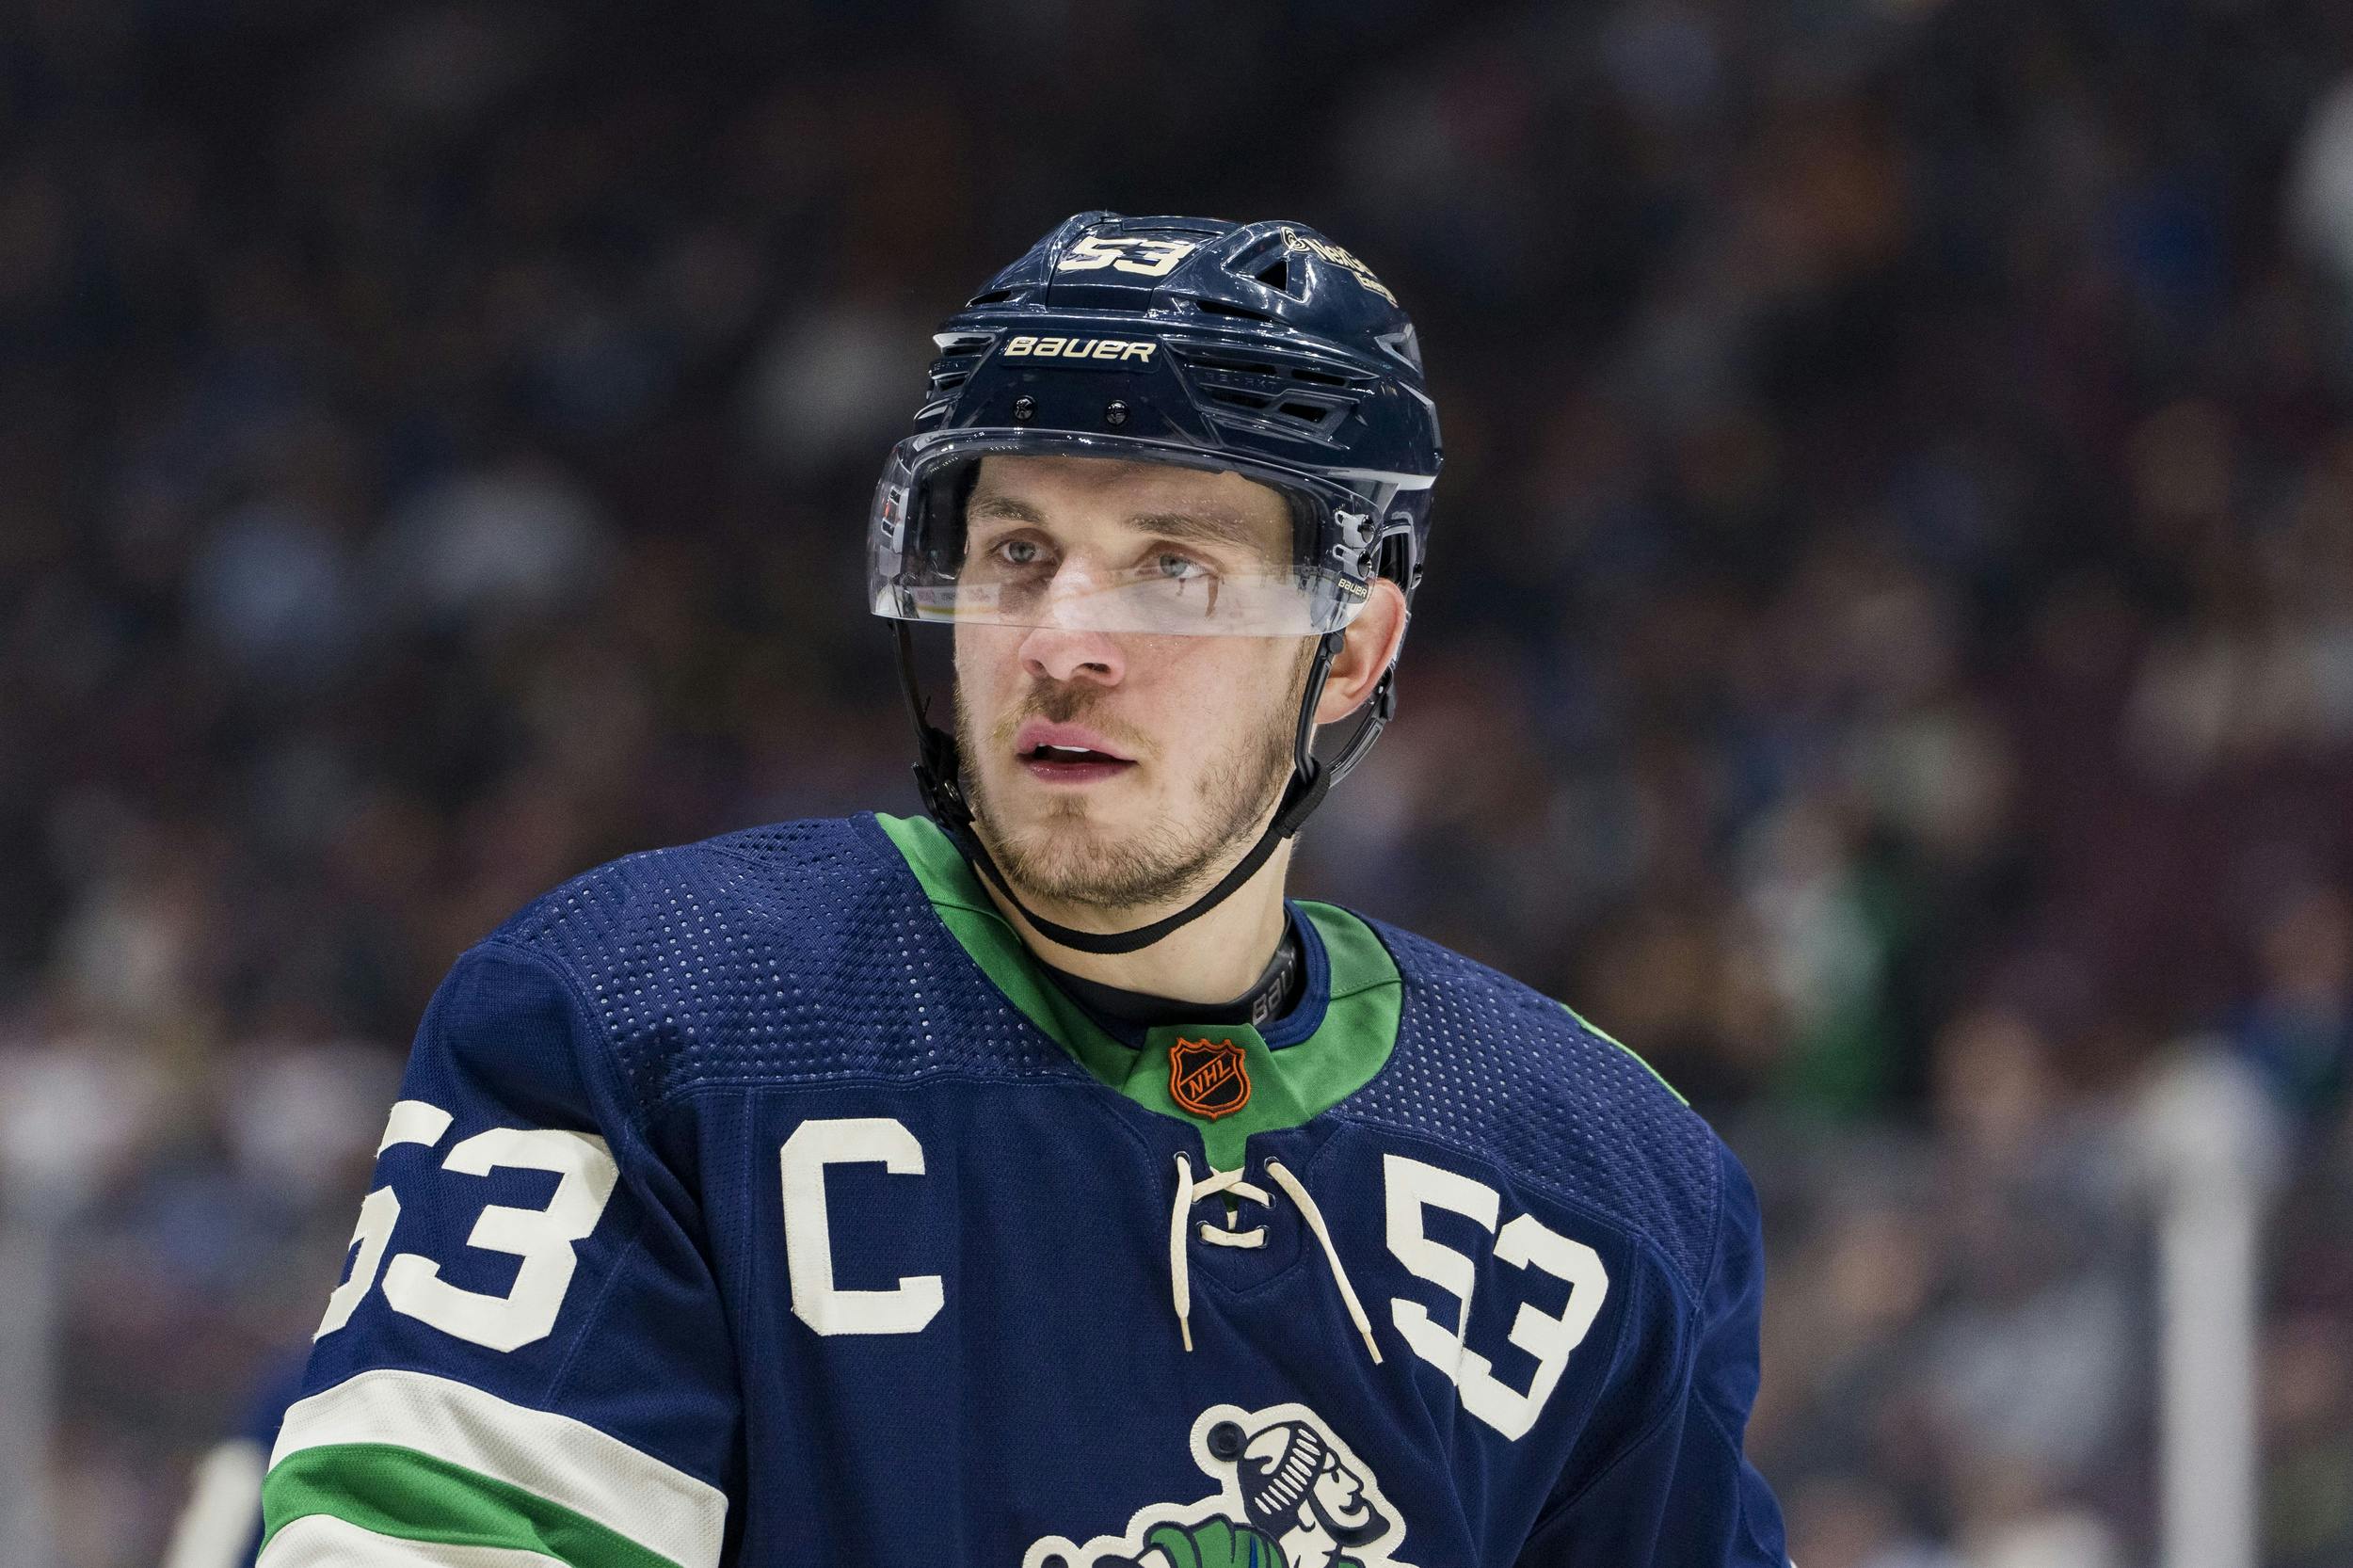 5 past trades to help set the Canucks’ bare minimum asking price for Bo